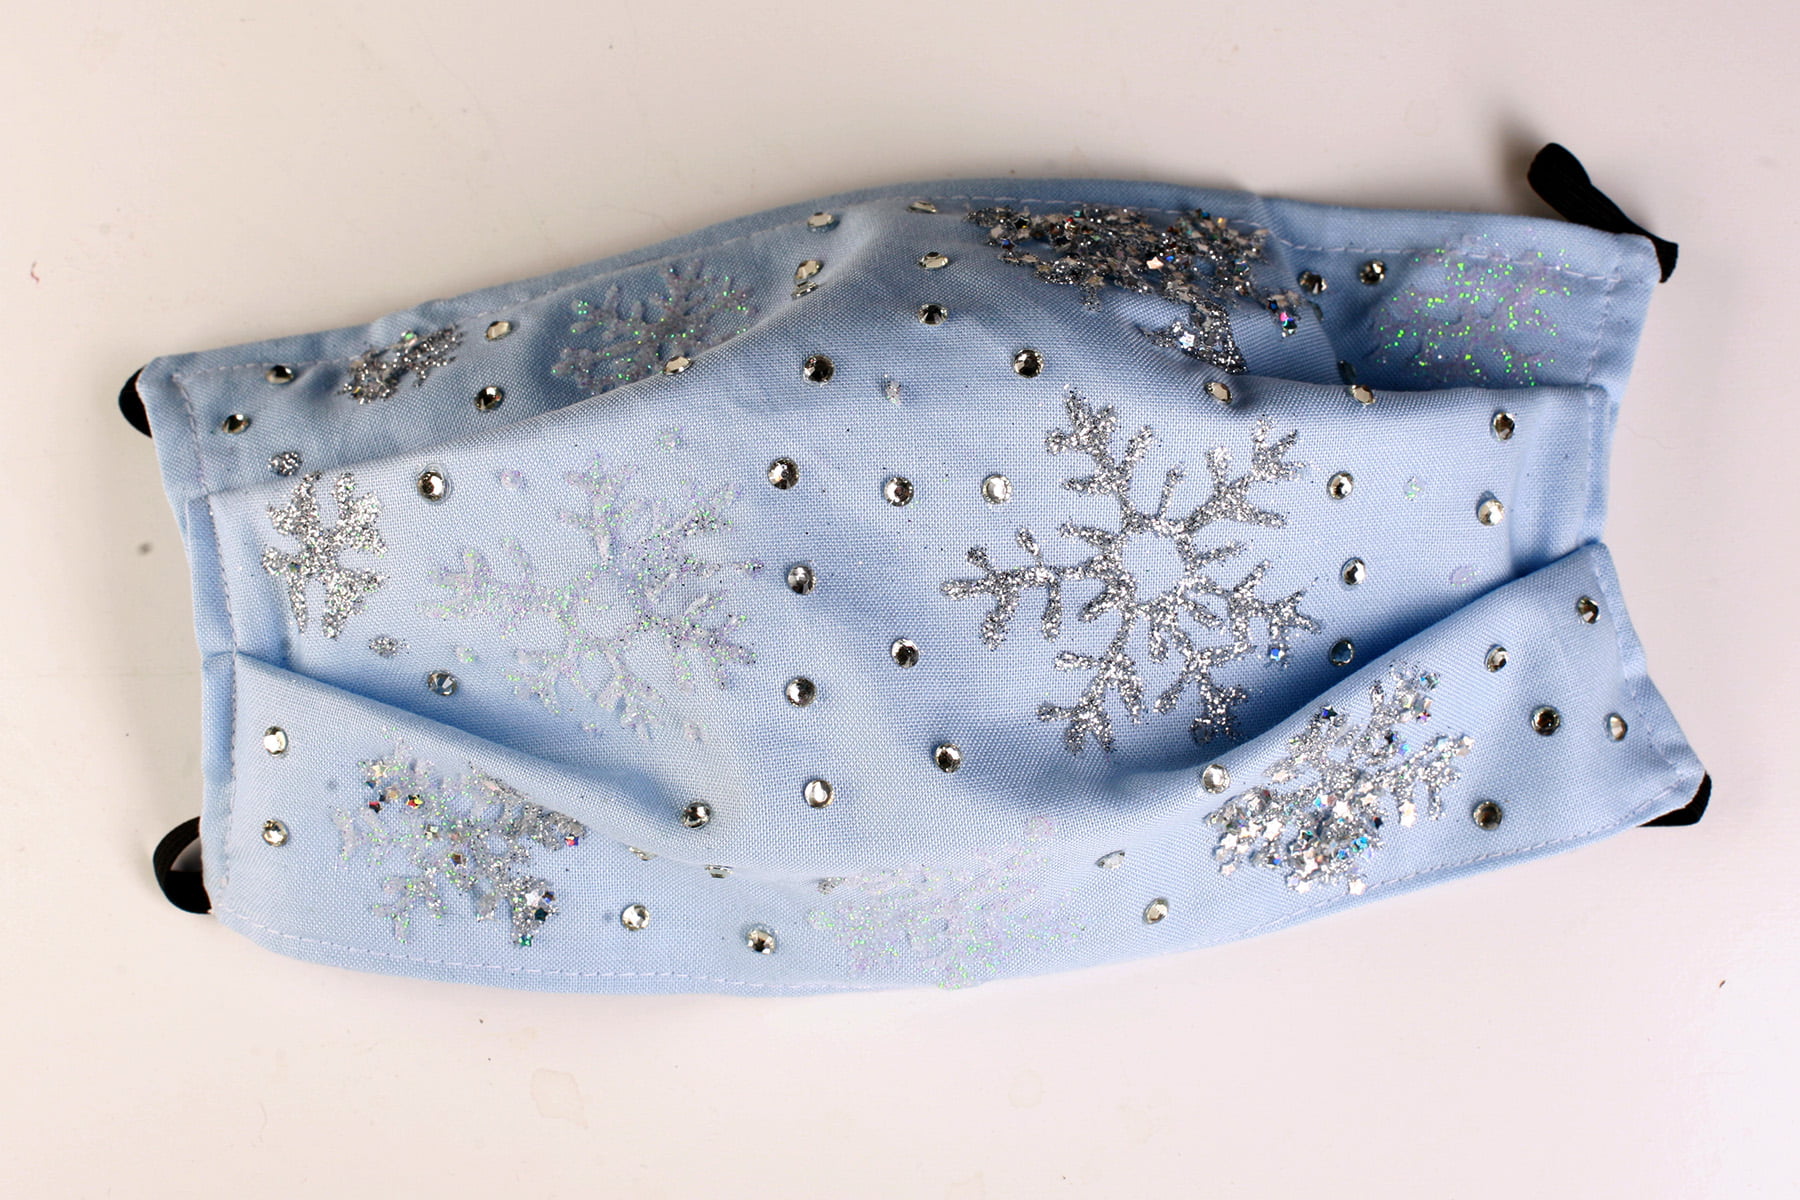 A light blue face mask with glittery white and silver snowflakes all over it.